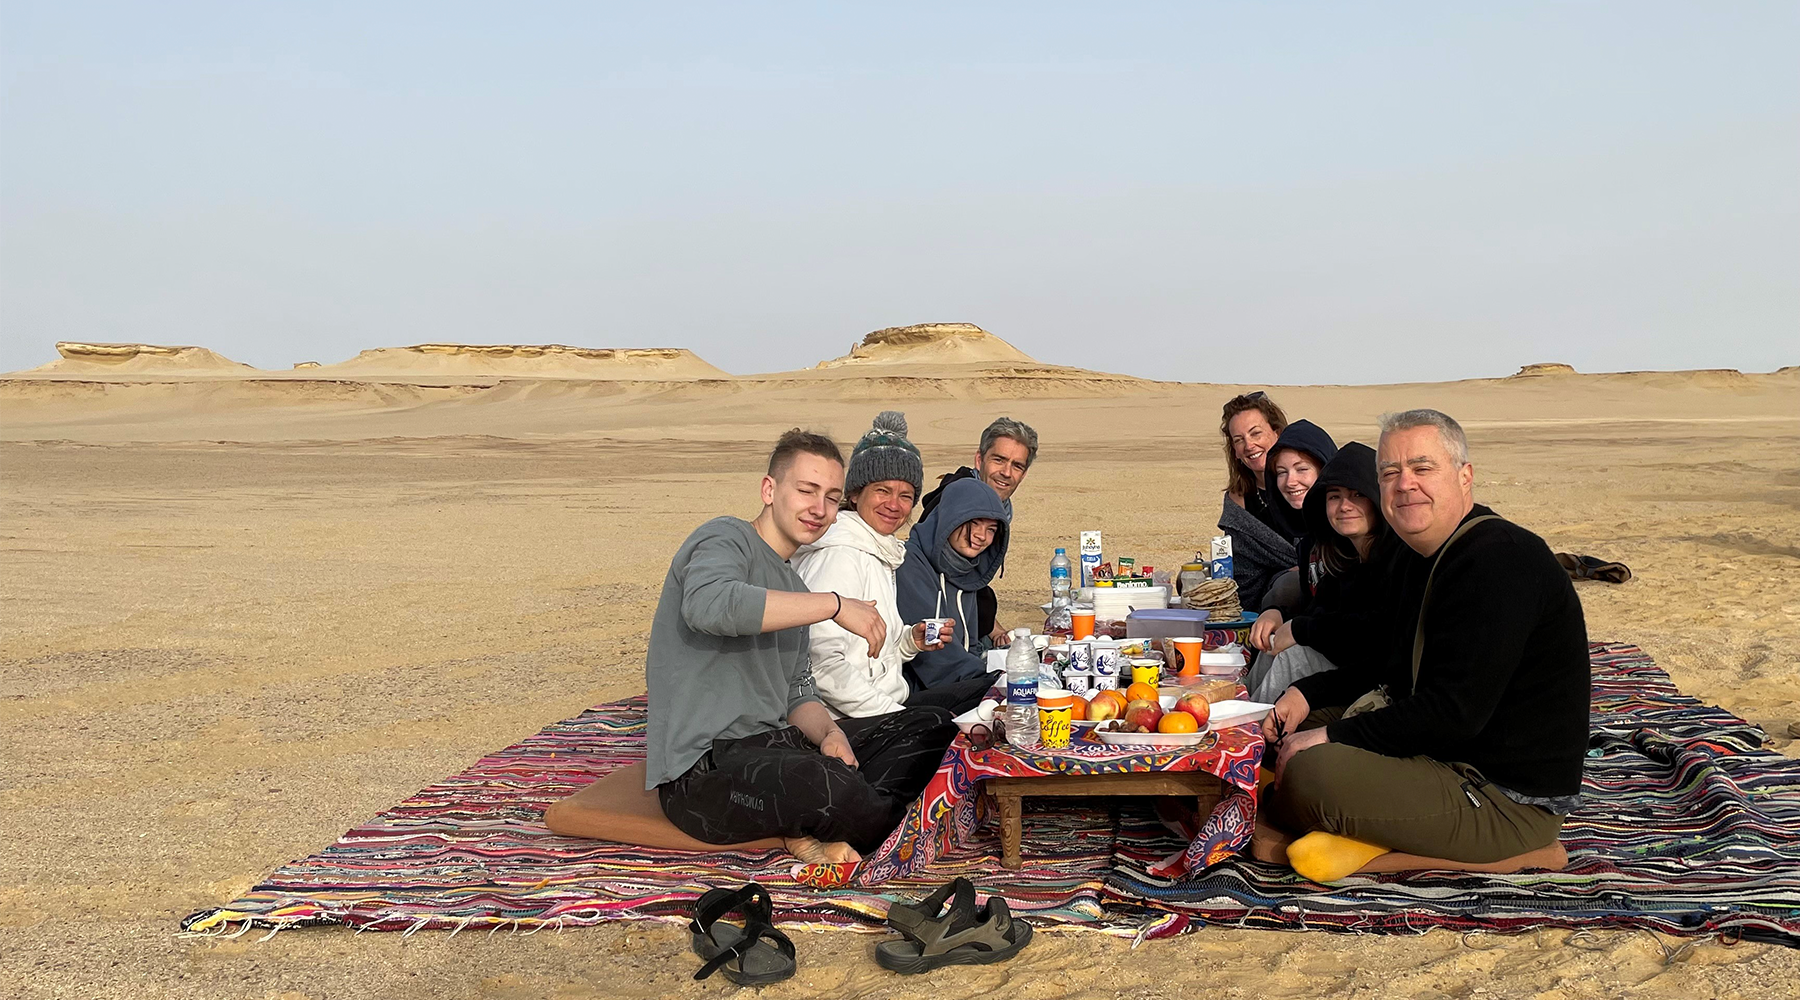 A group of people having a picnic in the desert